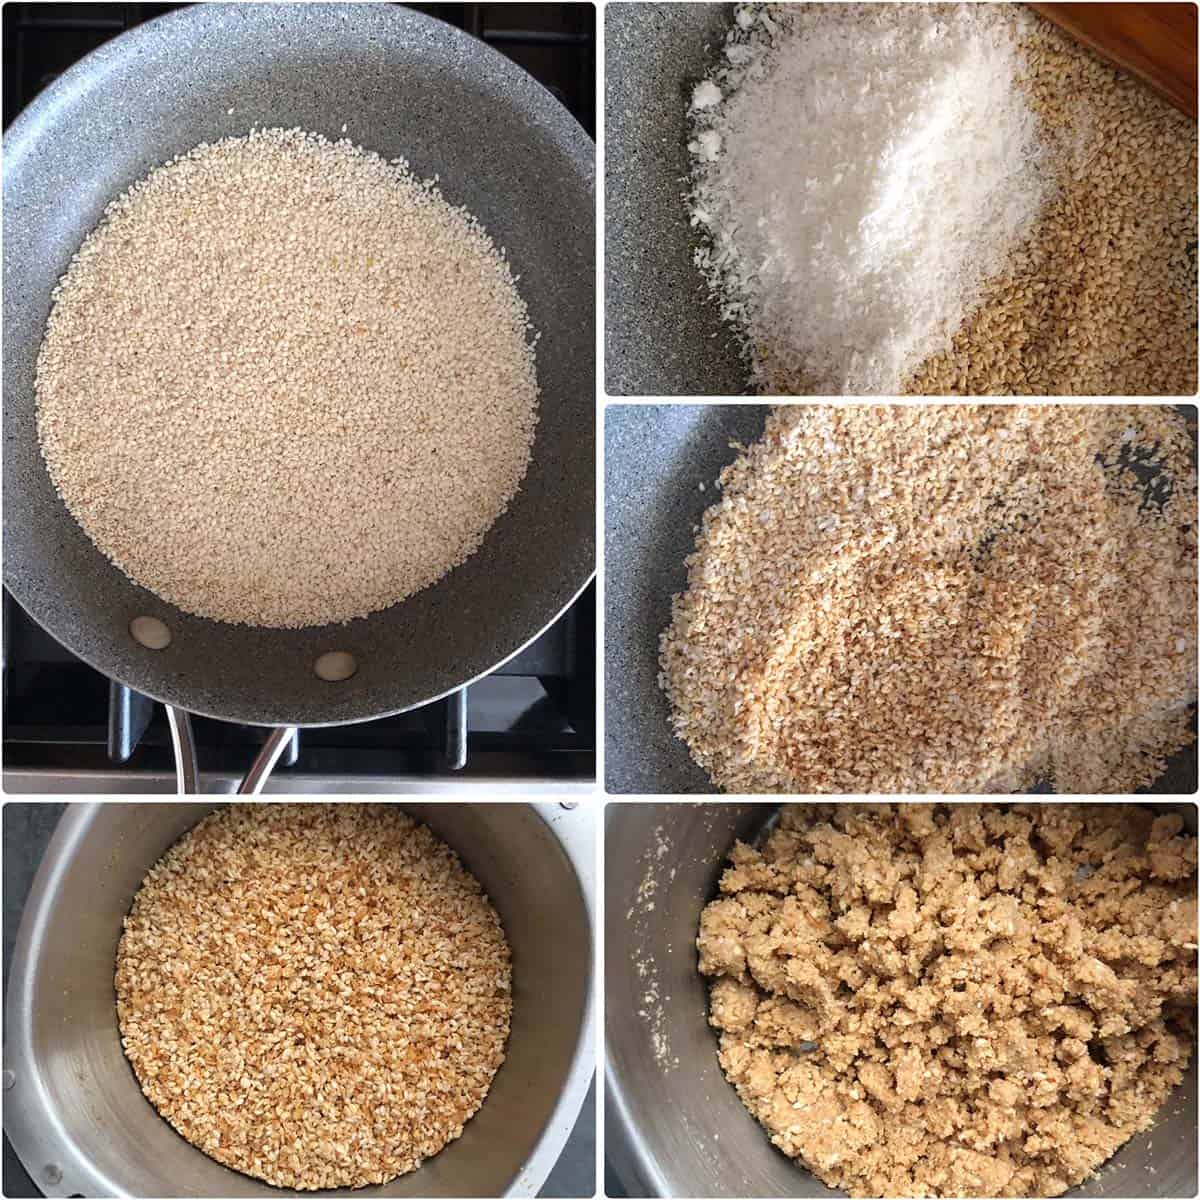 5 panel photo showing the roasting of sesame seeds and dry coconut and ground to powder.